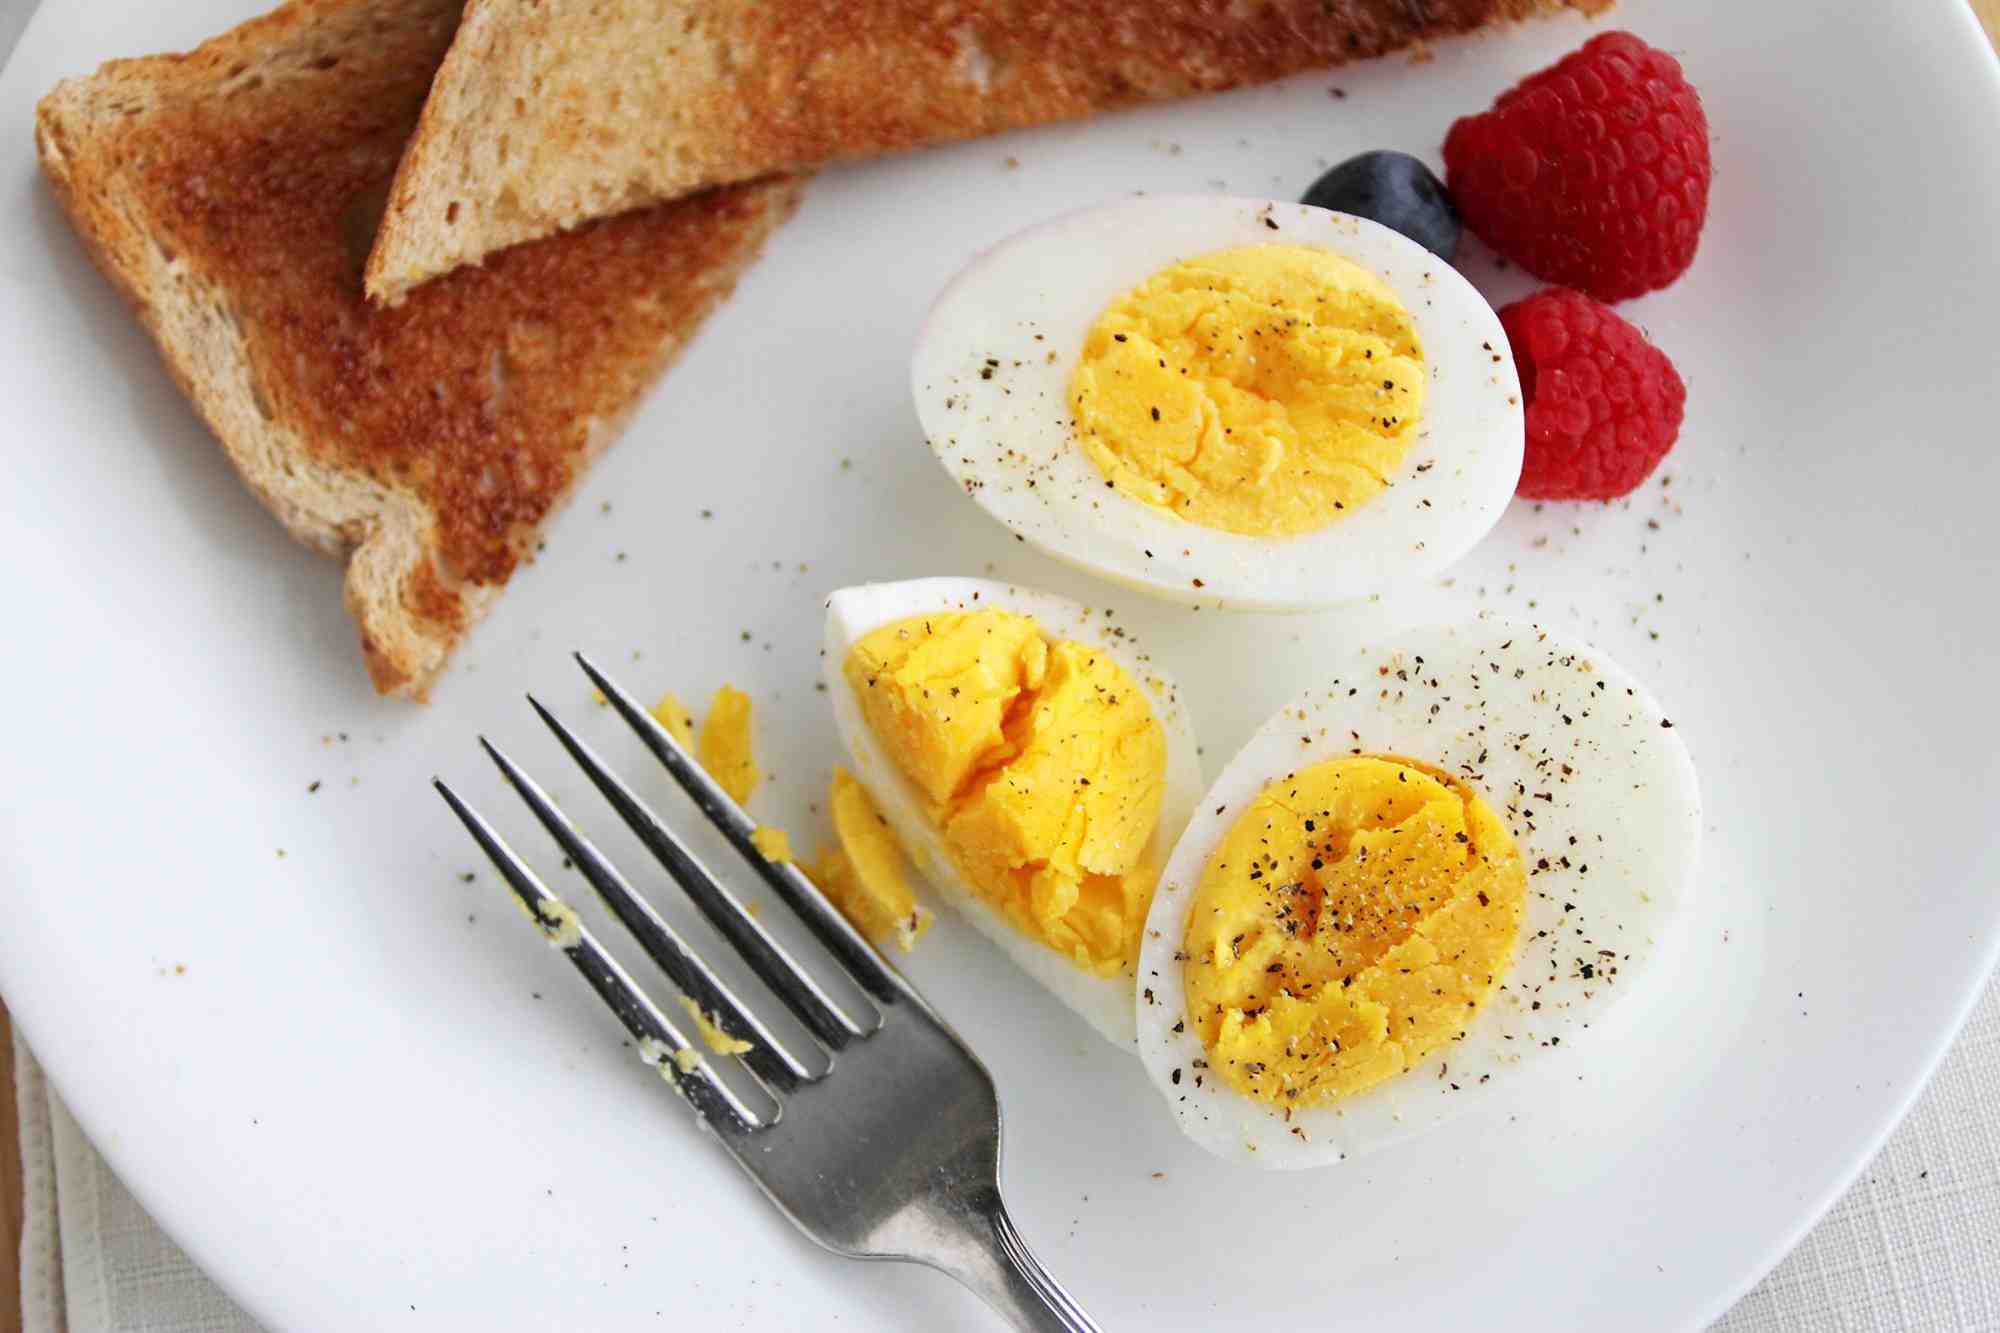 What are the disadvantages of having eggs?